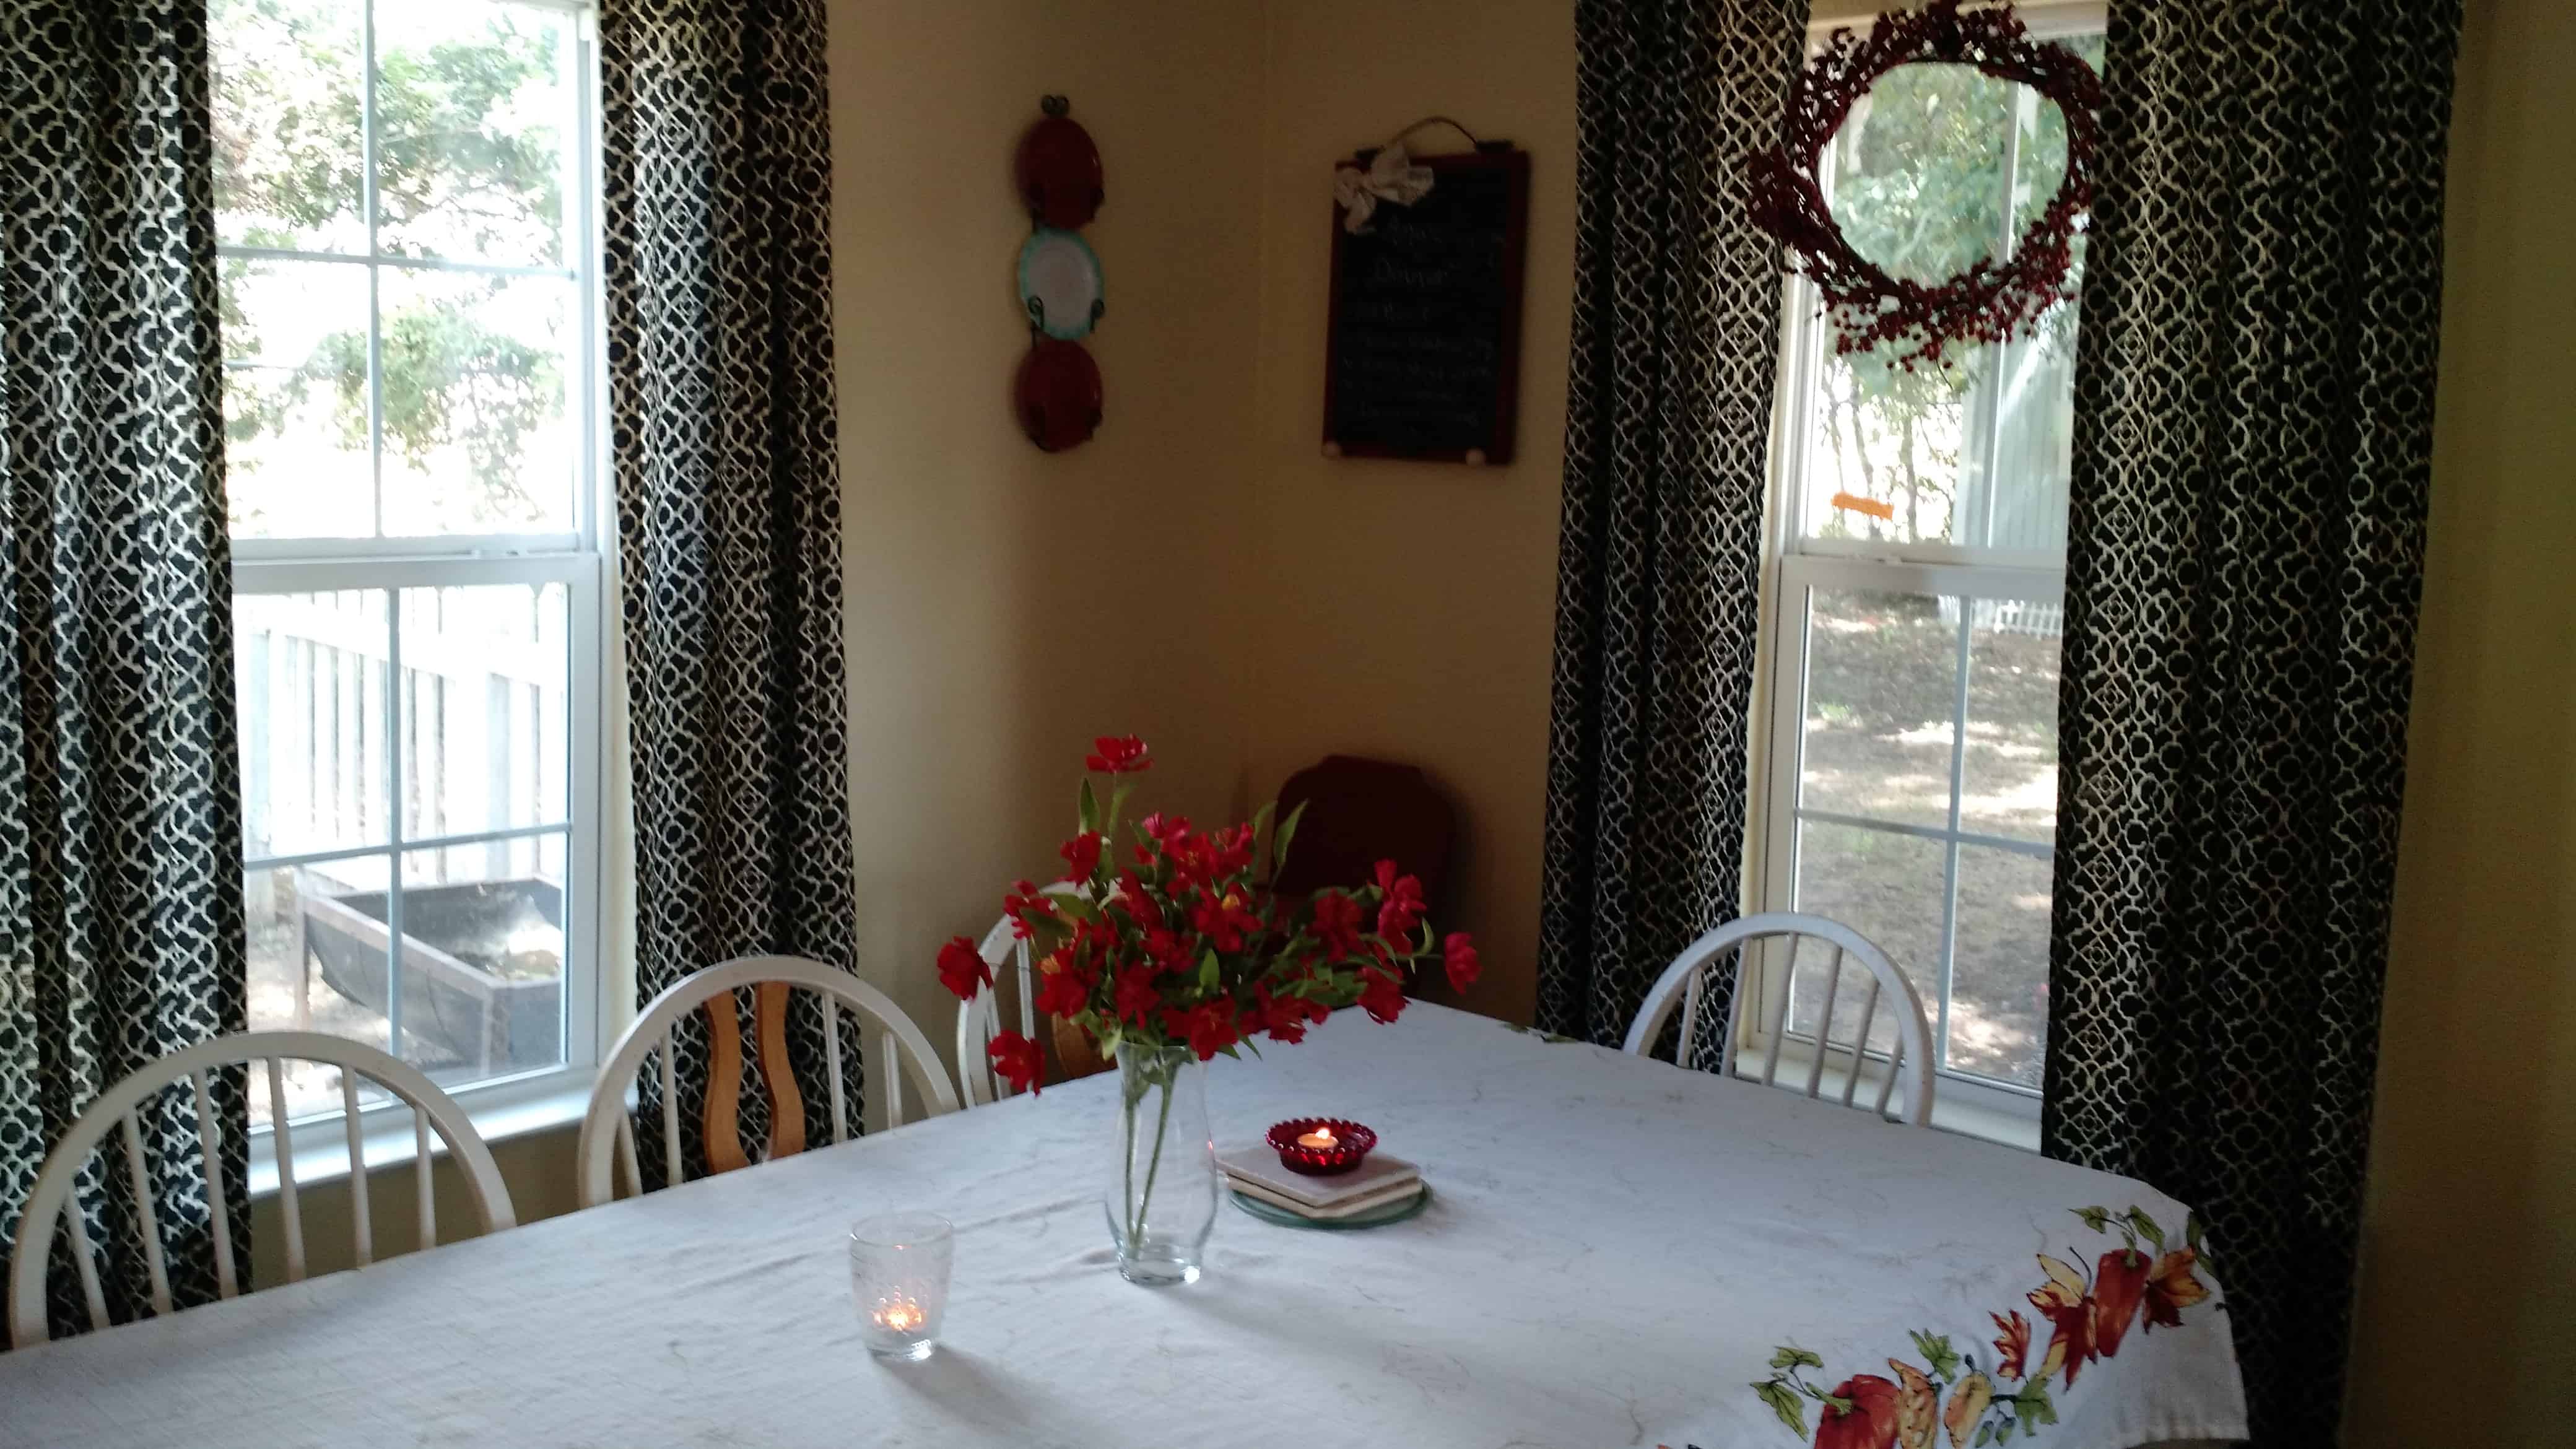 What Our Dining Room Remodel Taught Me About the Little Moments of Life | Kristy's Cottage